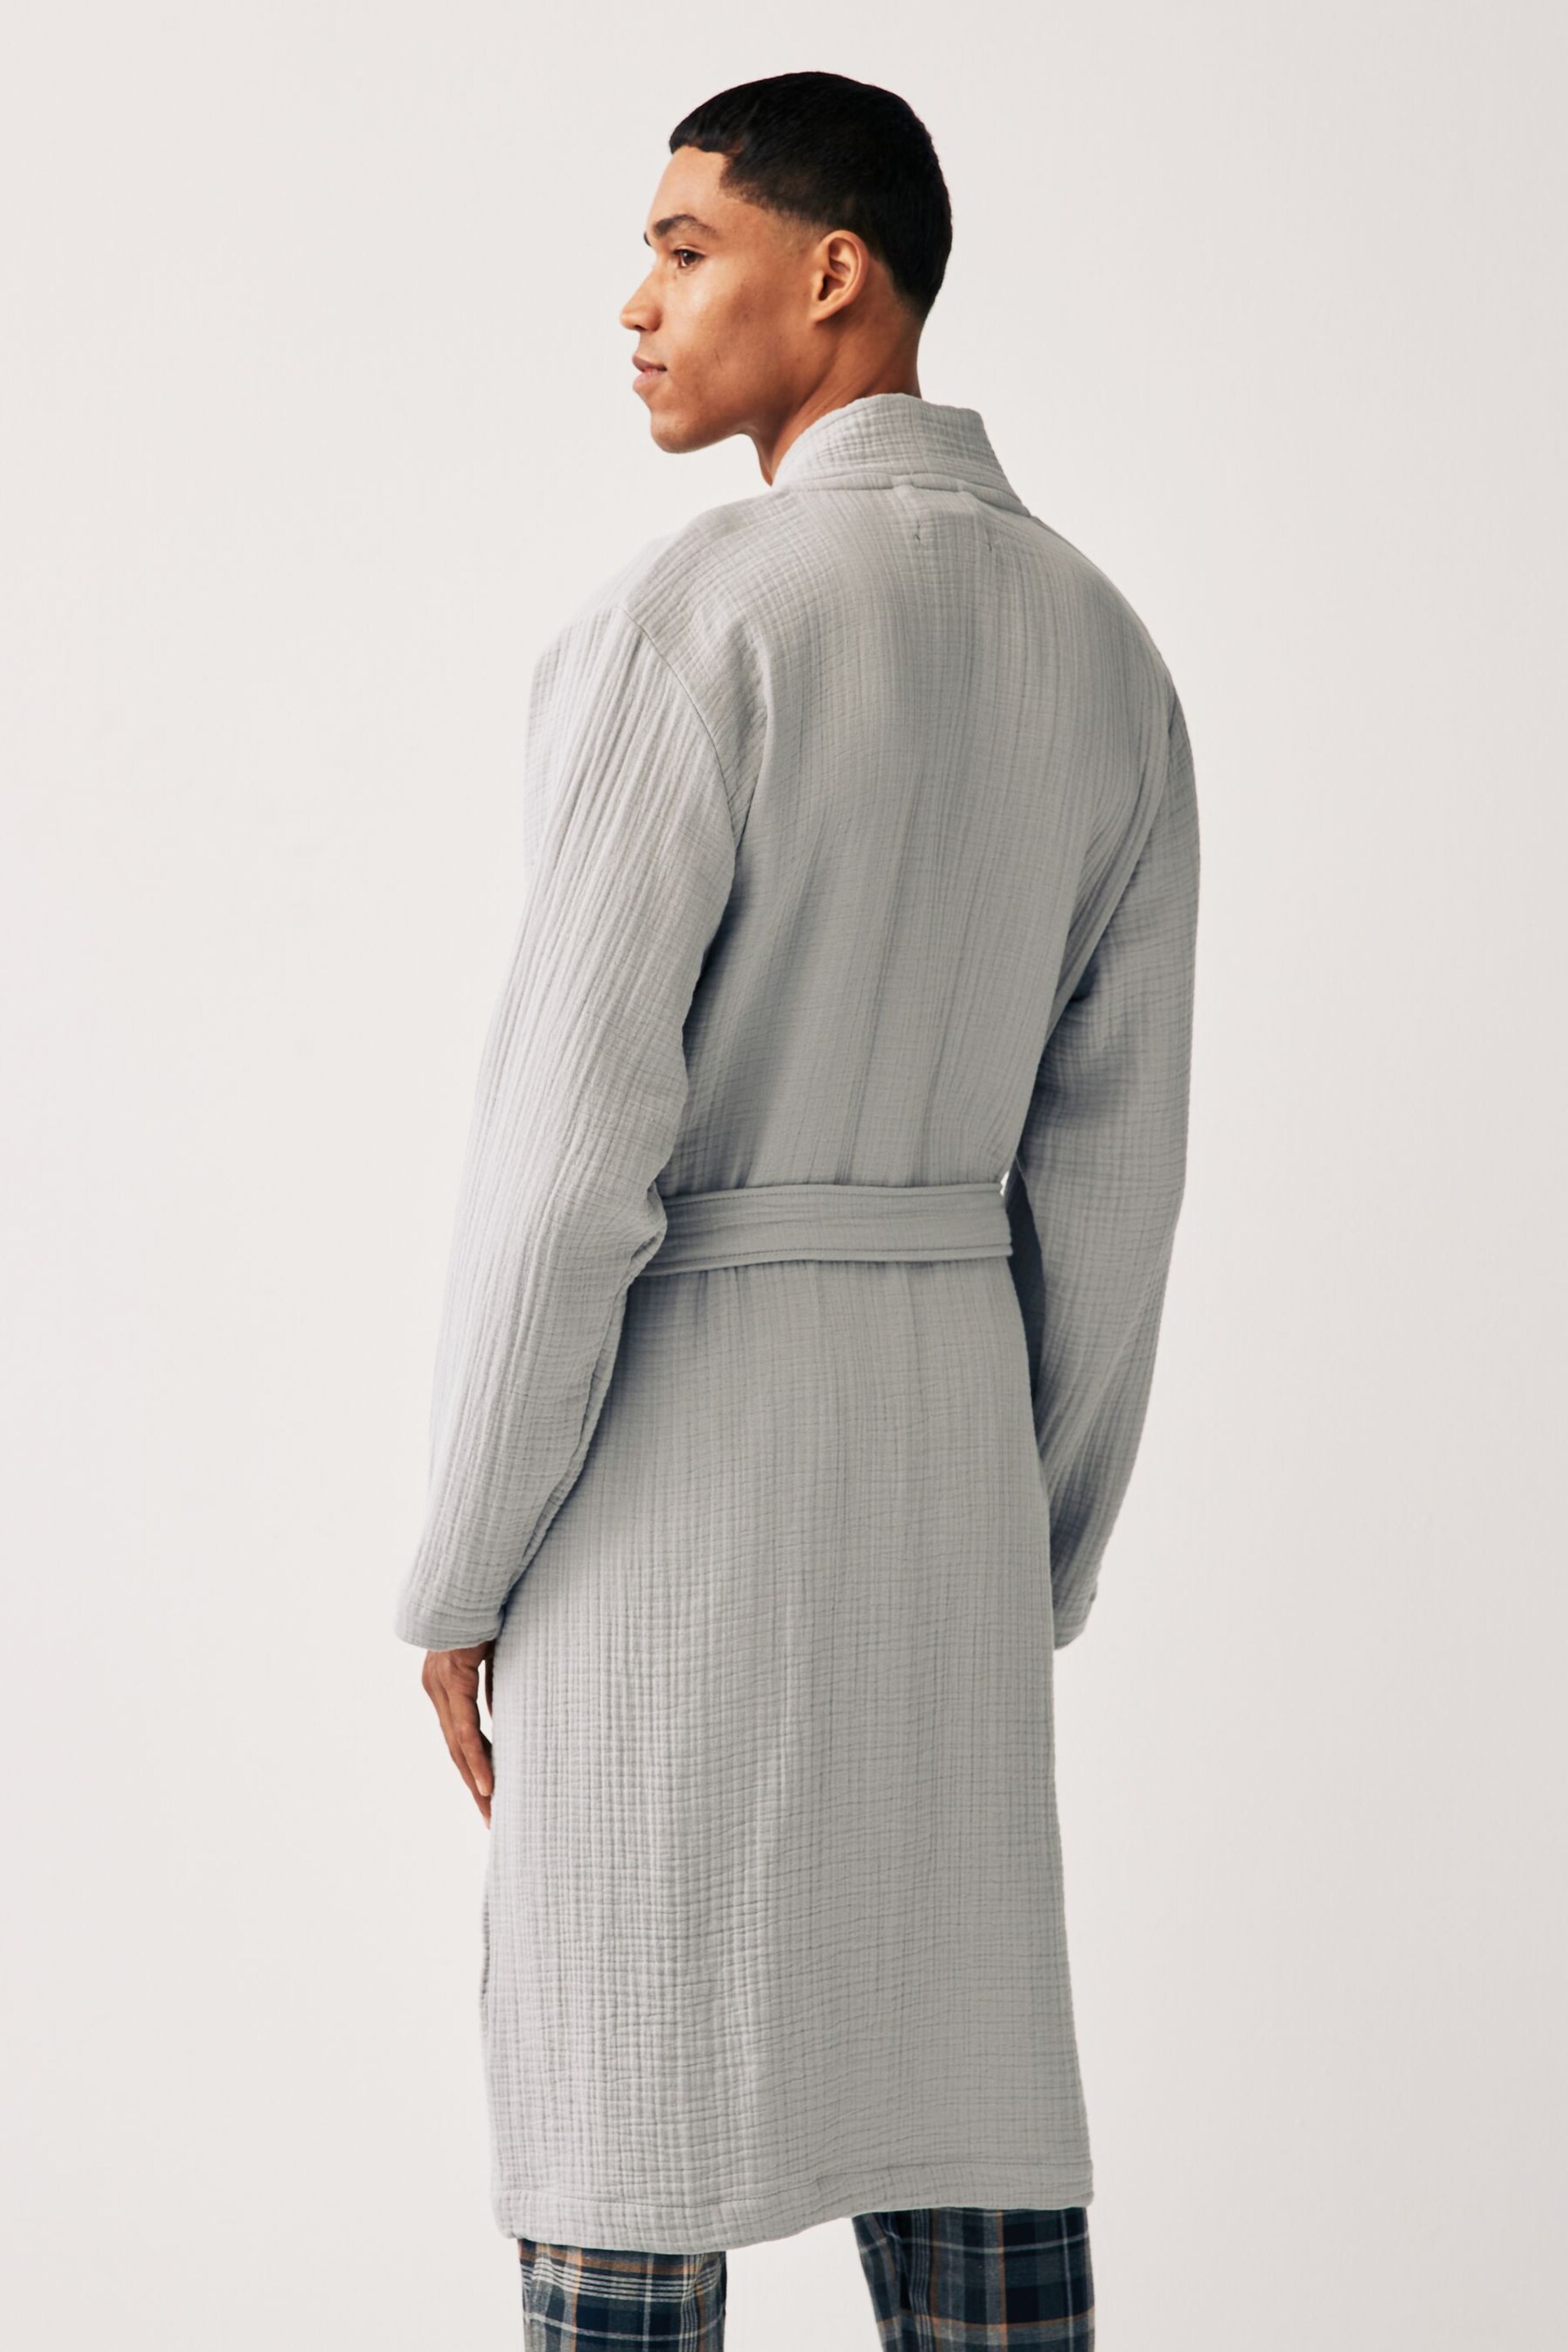 Tommy Hilfiger Grey Woven Robe - Image 2 of 5